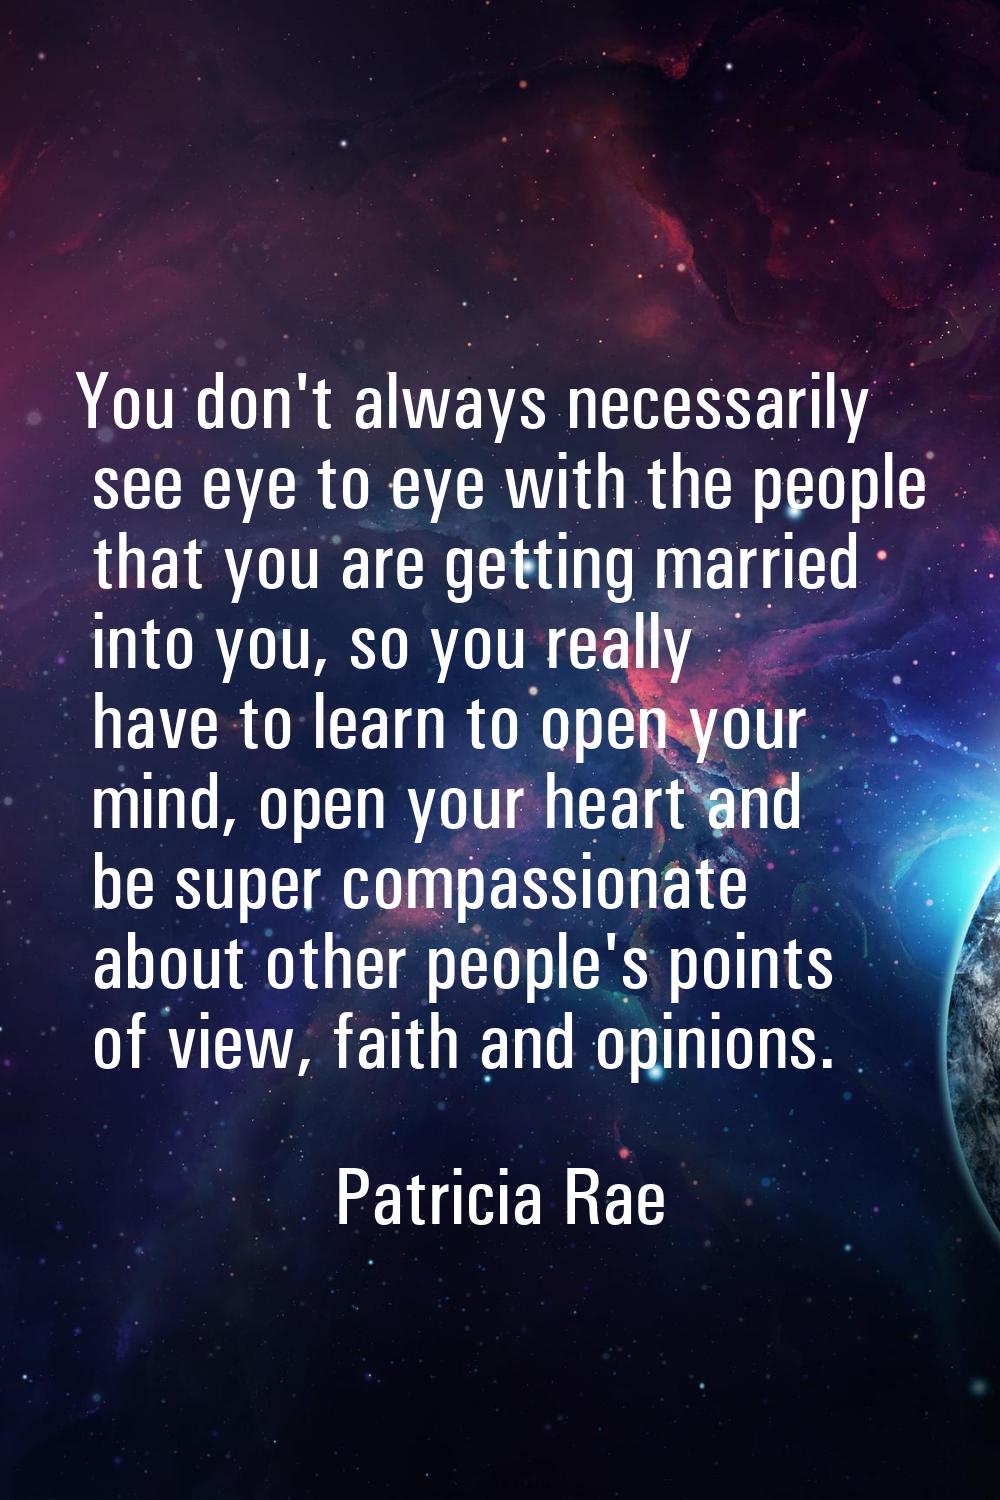 You don't always necessarily see eye to eye with the people that you are getting married into you, 